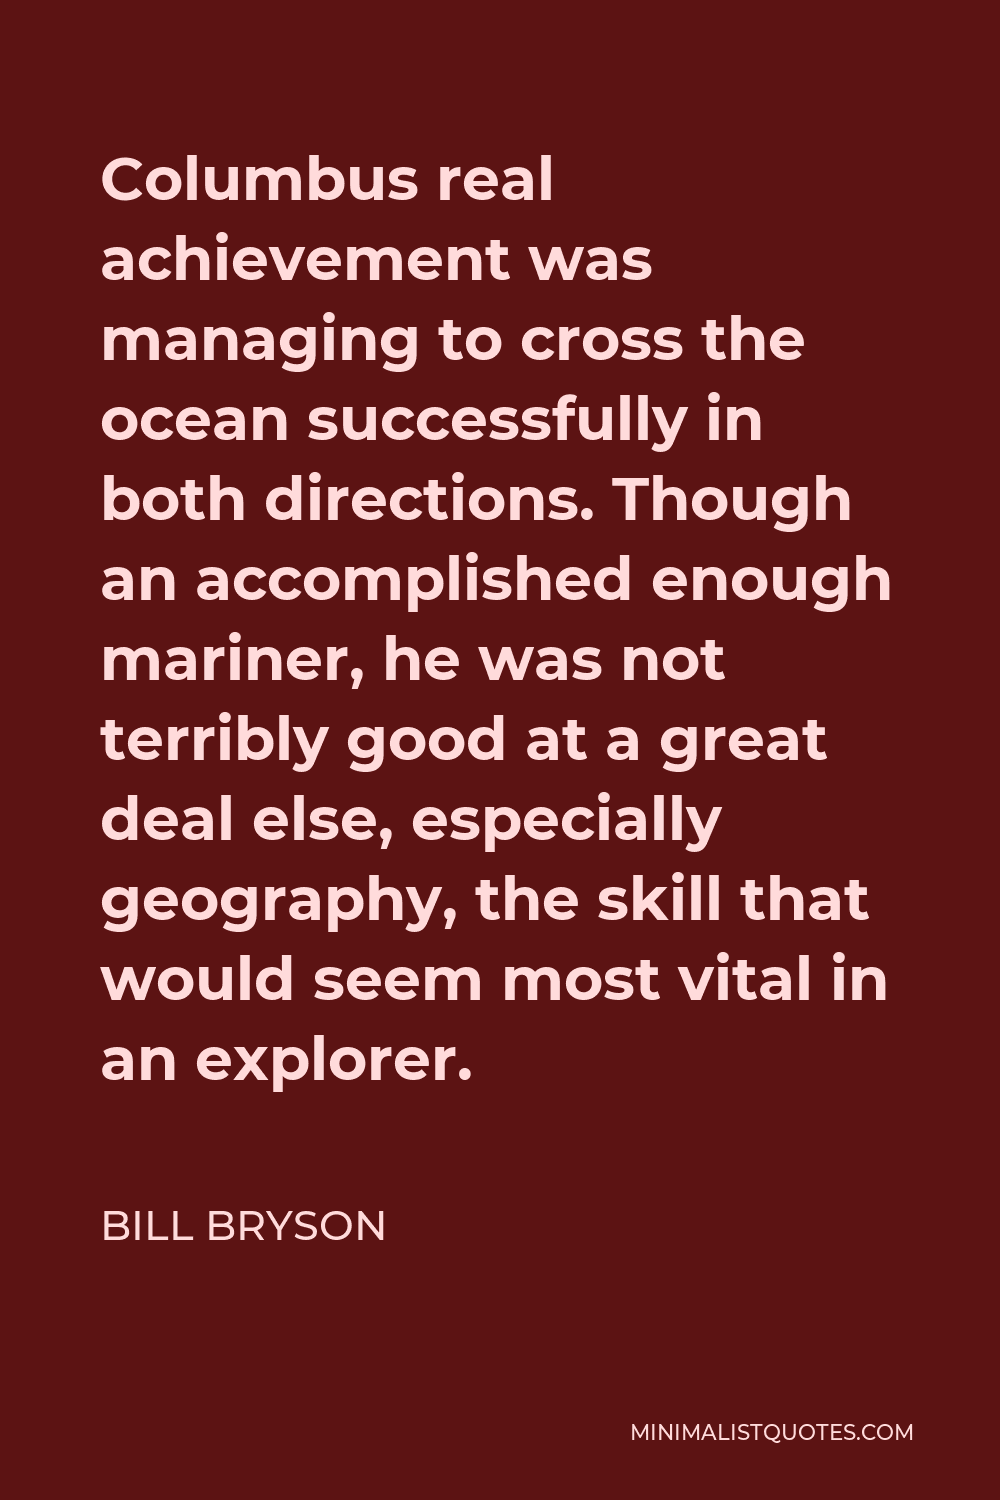 Bill Bryson Quote - Columbus real achievement was managing to cross the ocean successfully in both directions. Though an accomplished enough mariner, he was not terribly good at a great deal else, especially geography, the skill that would seem most vital in an explorer.